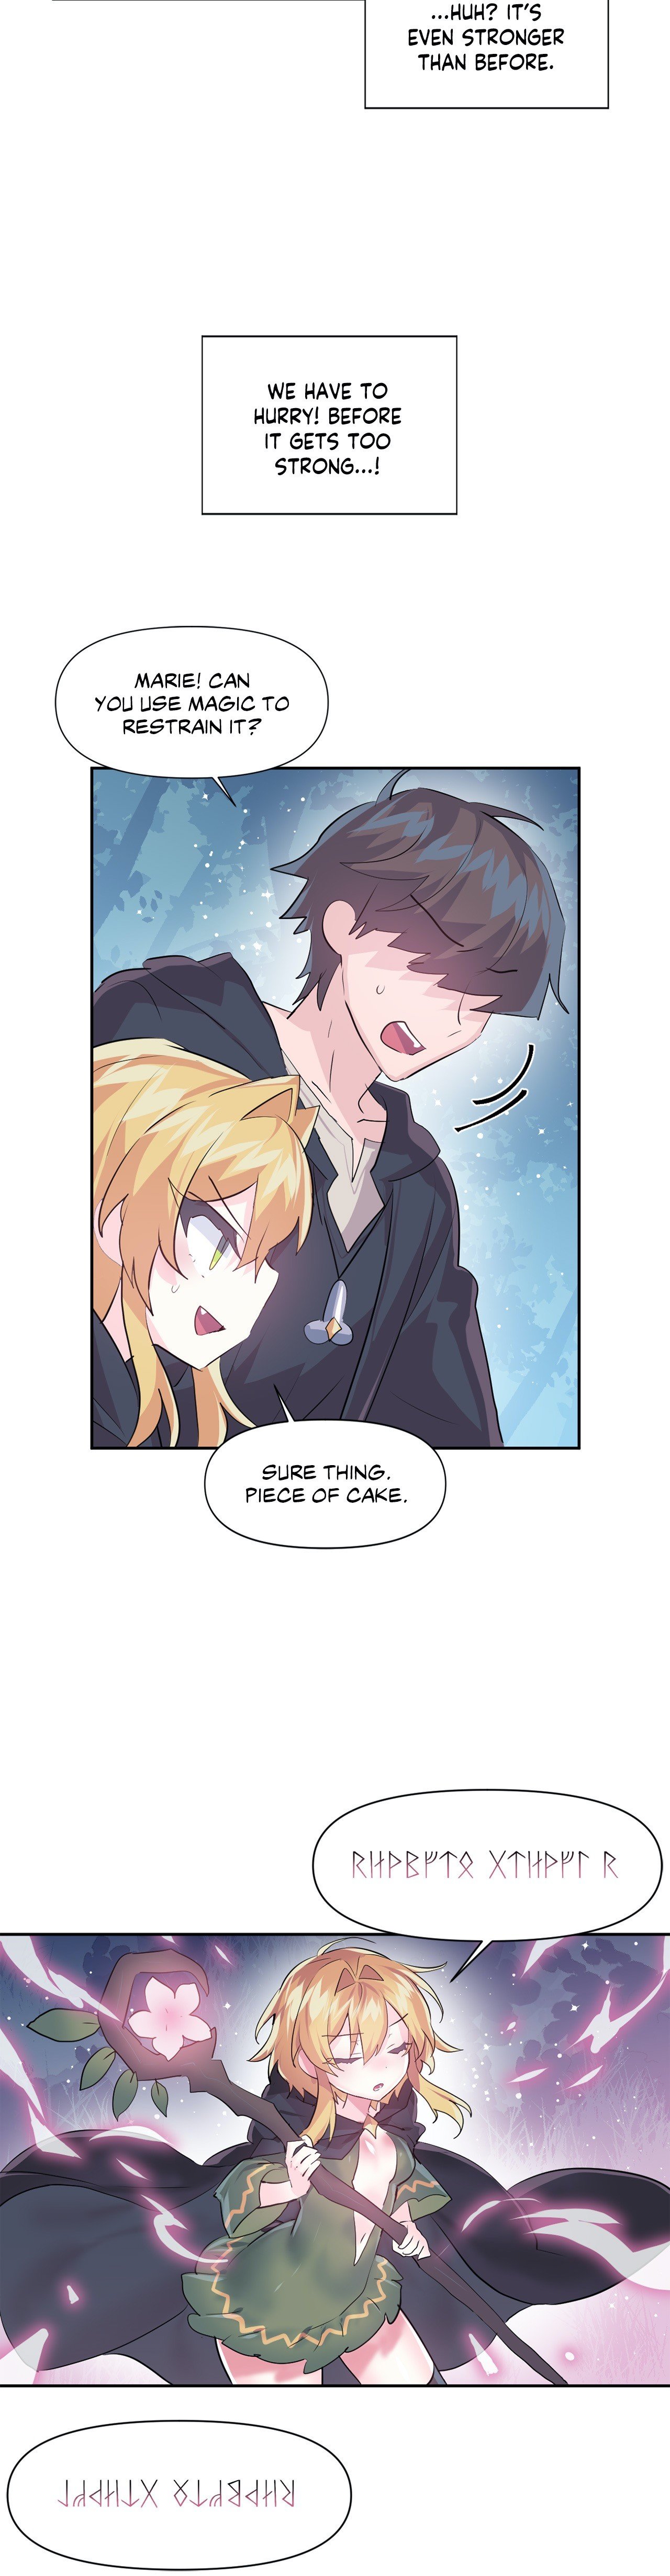 log-in-to-lust-a-land-chap-38-23